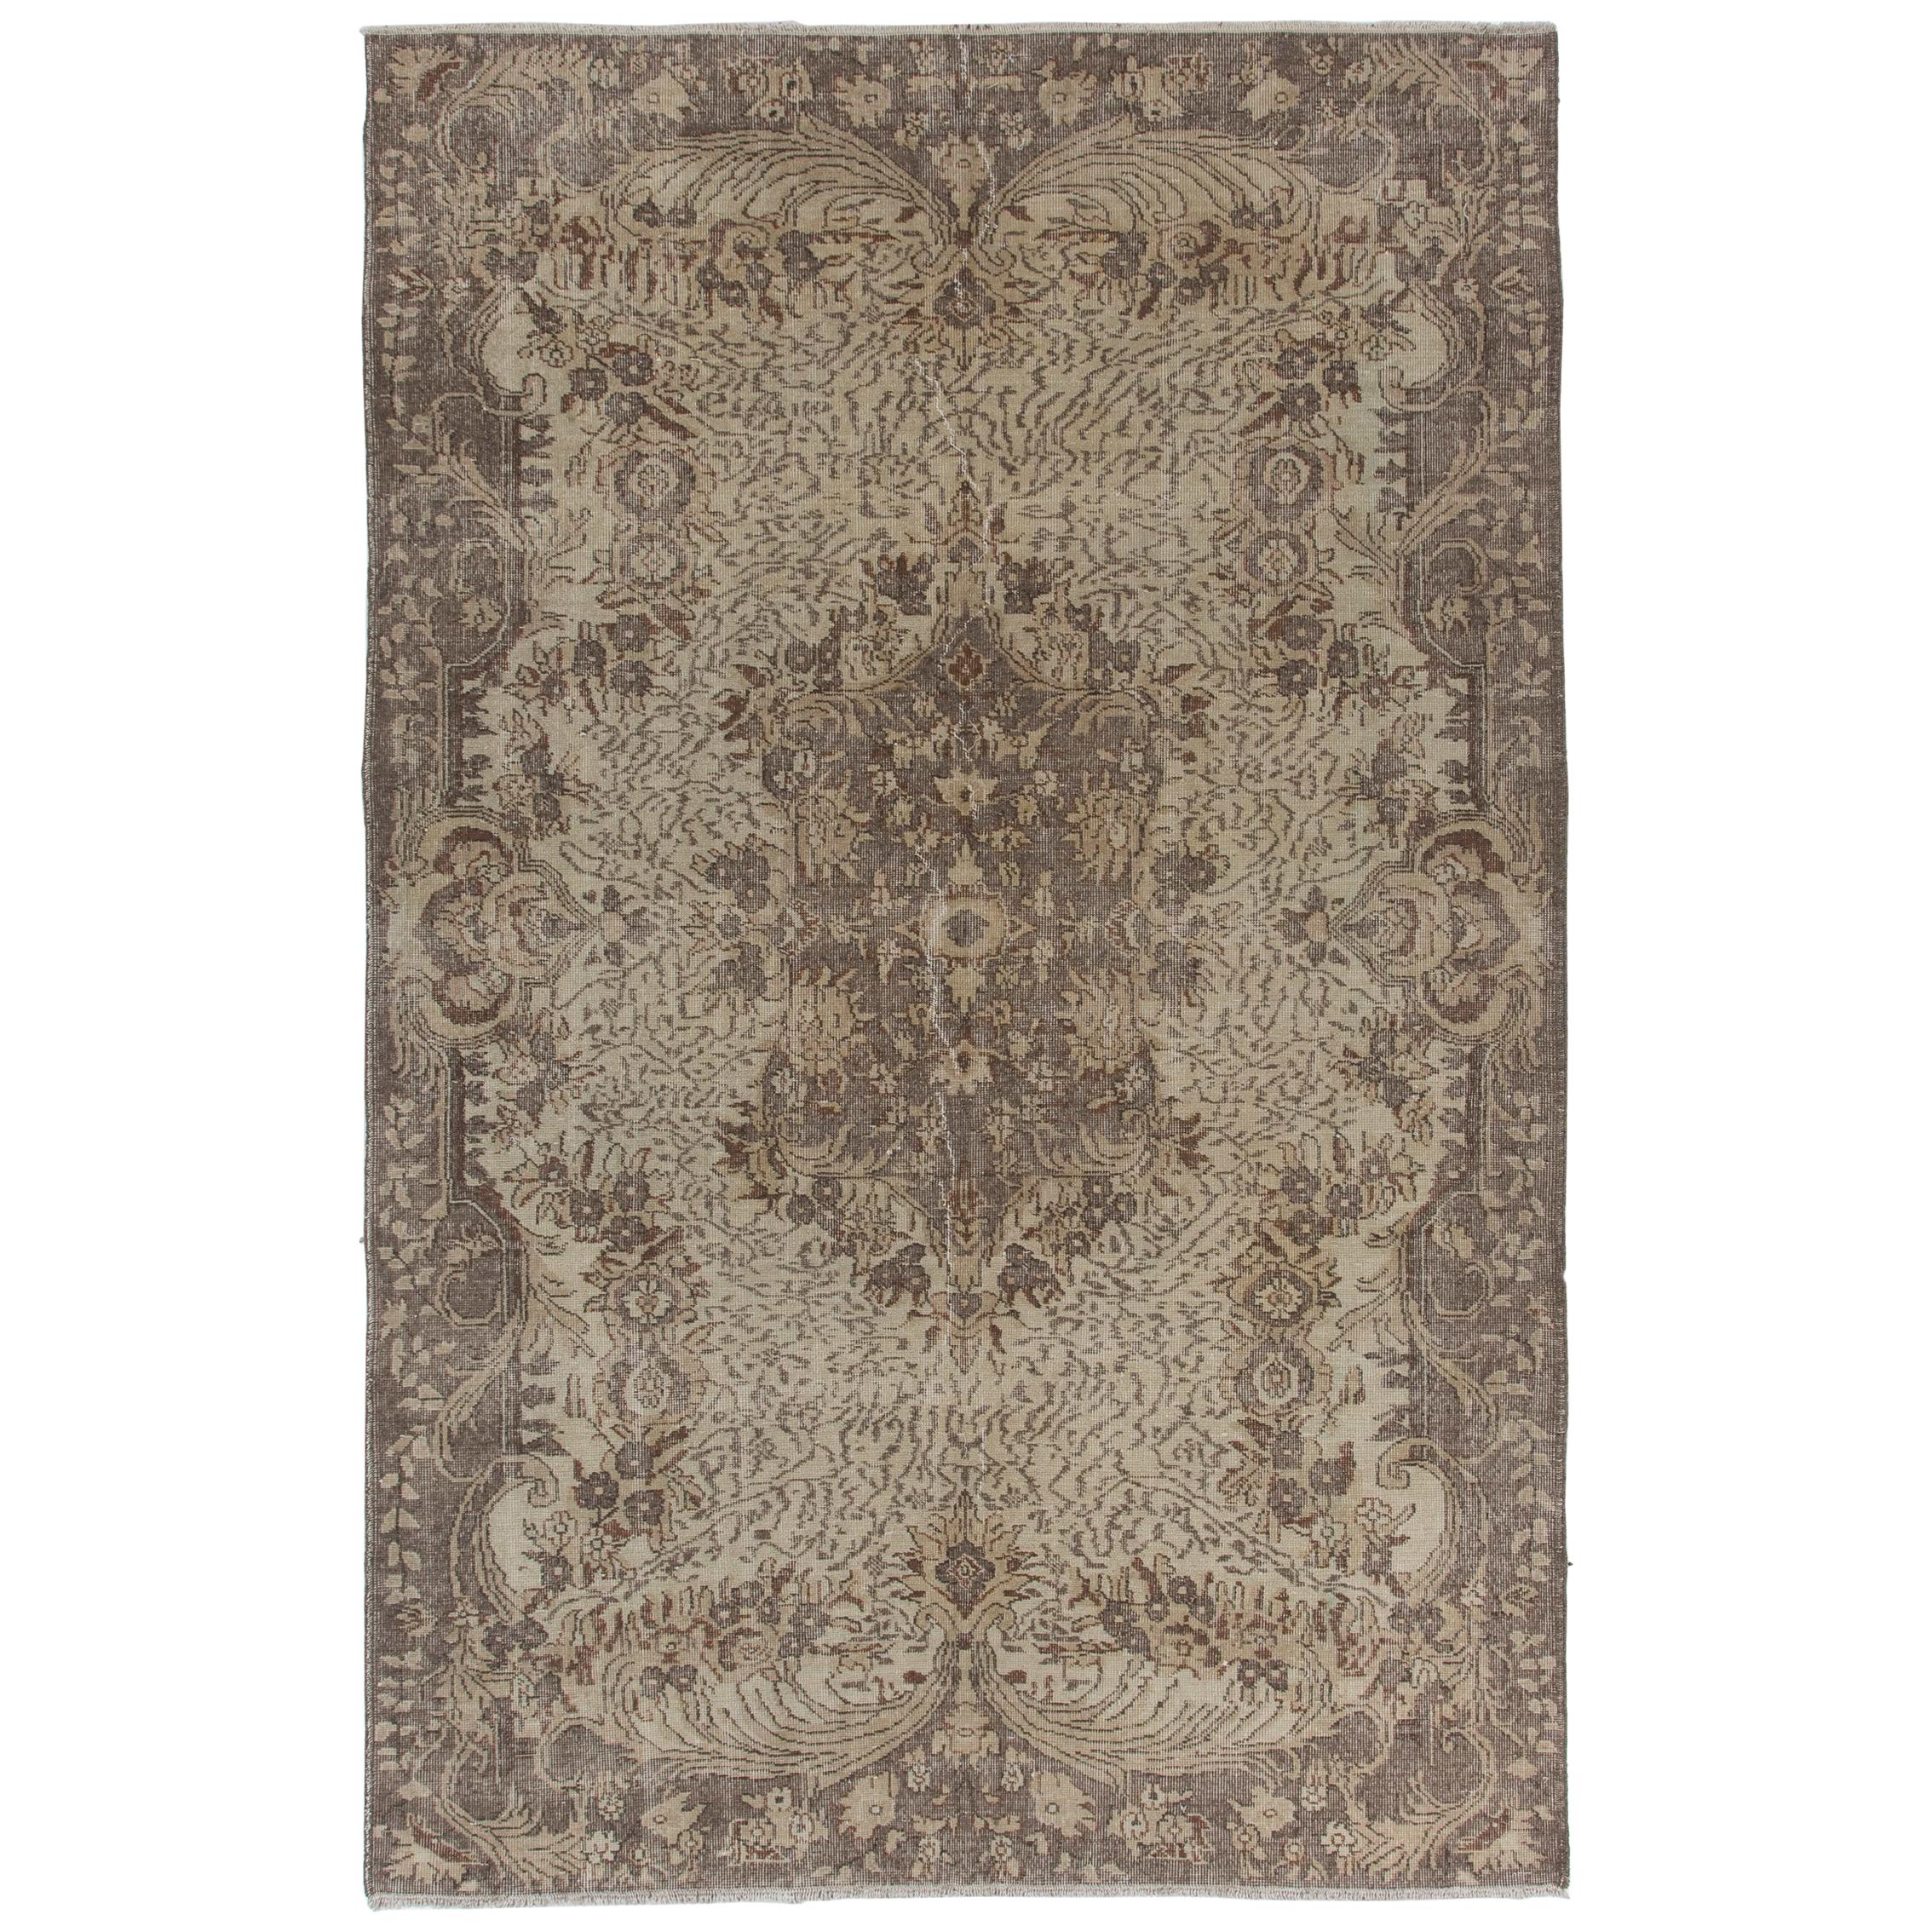 6.5x10 Ft Vintage Handmade Anatolian Wool Area Rug in Taupe and Beige